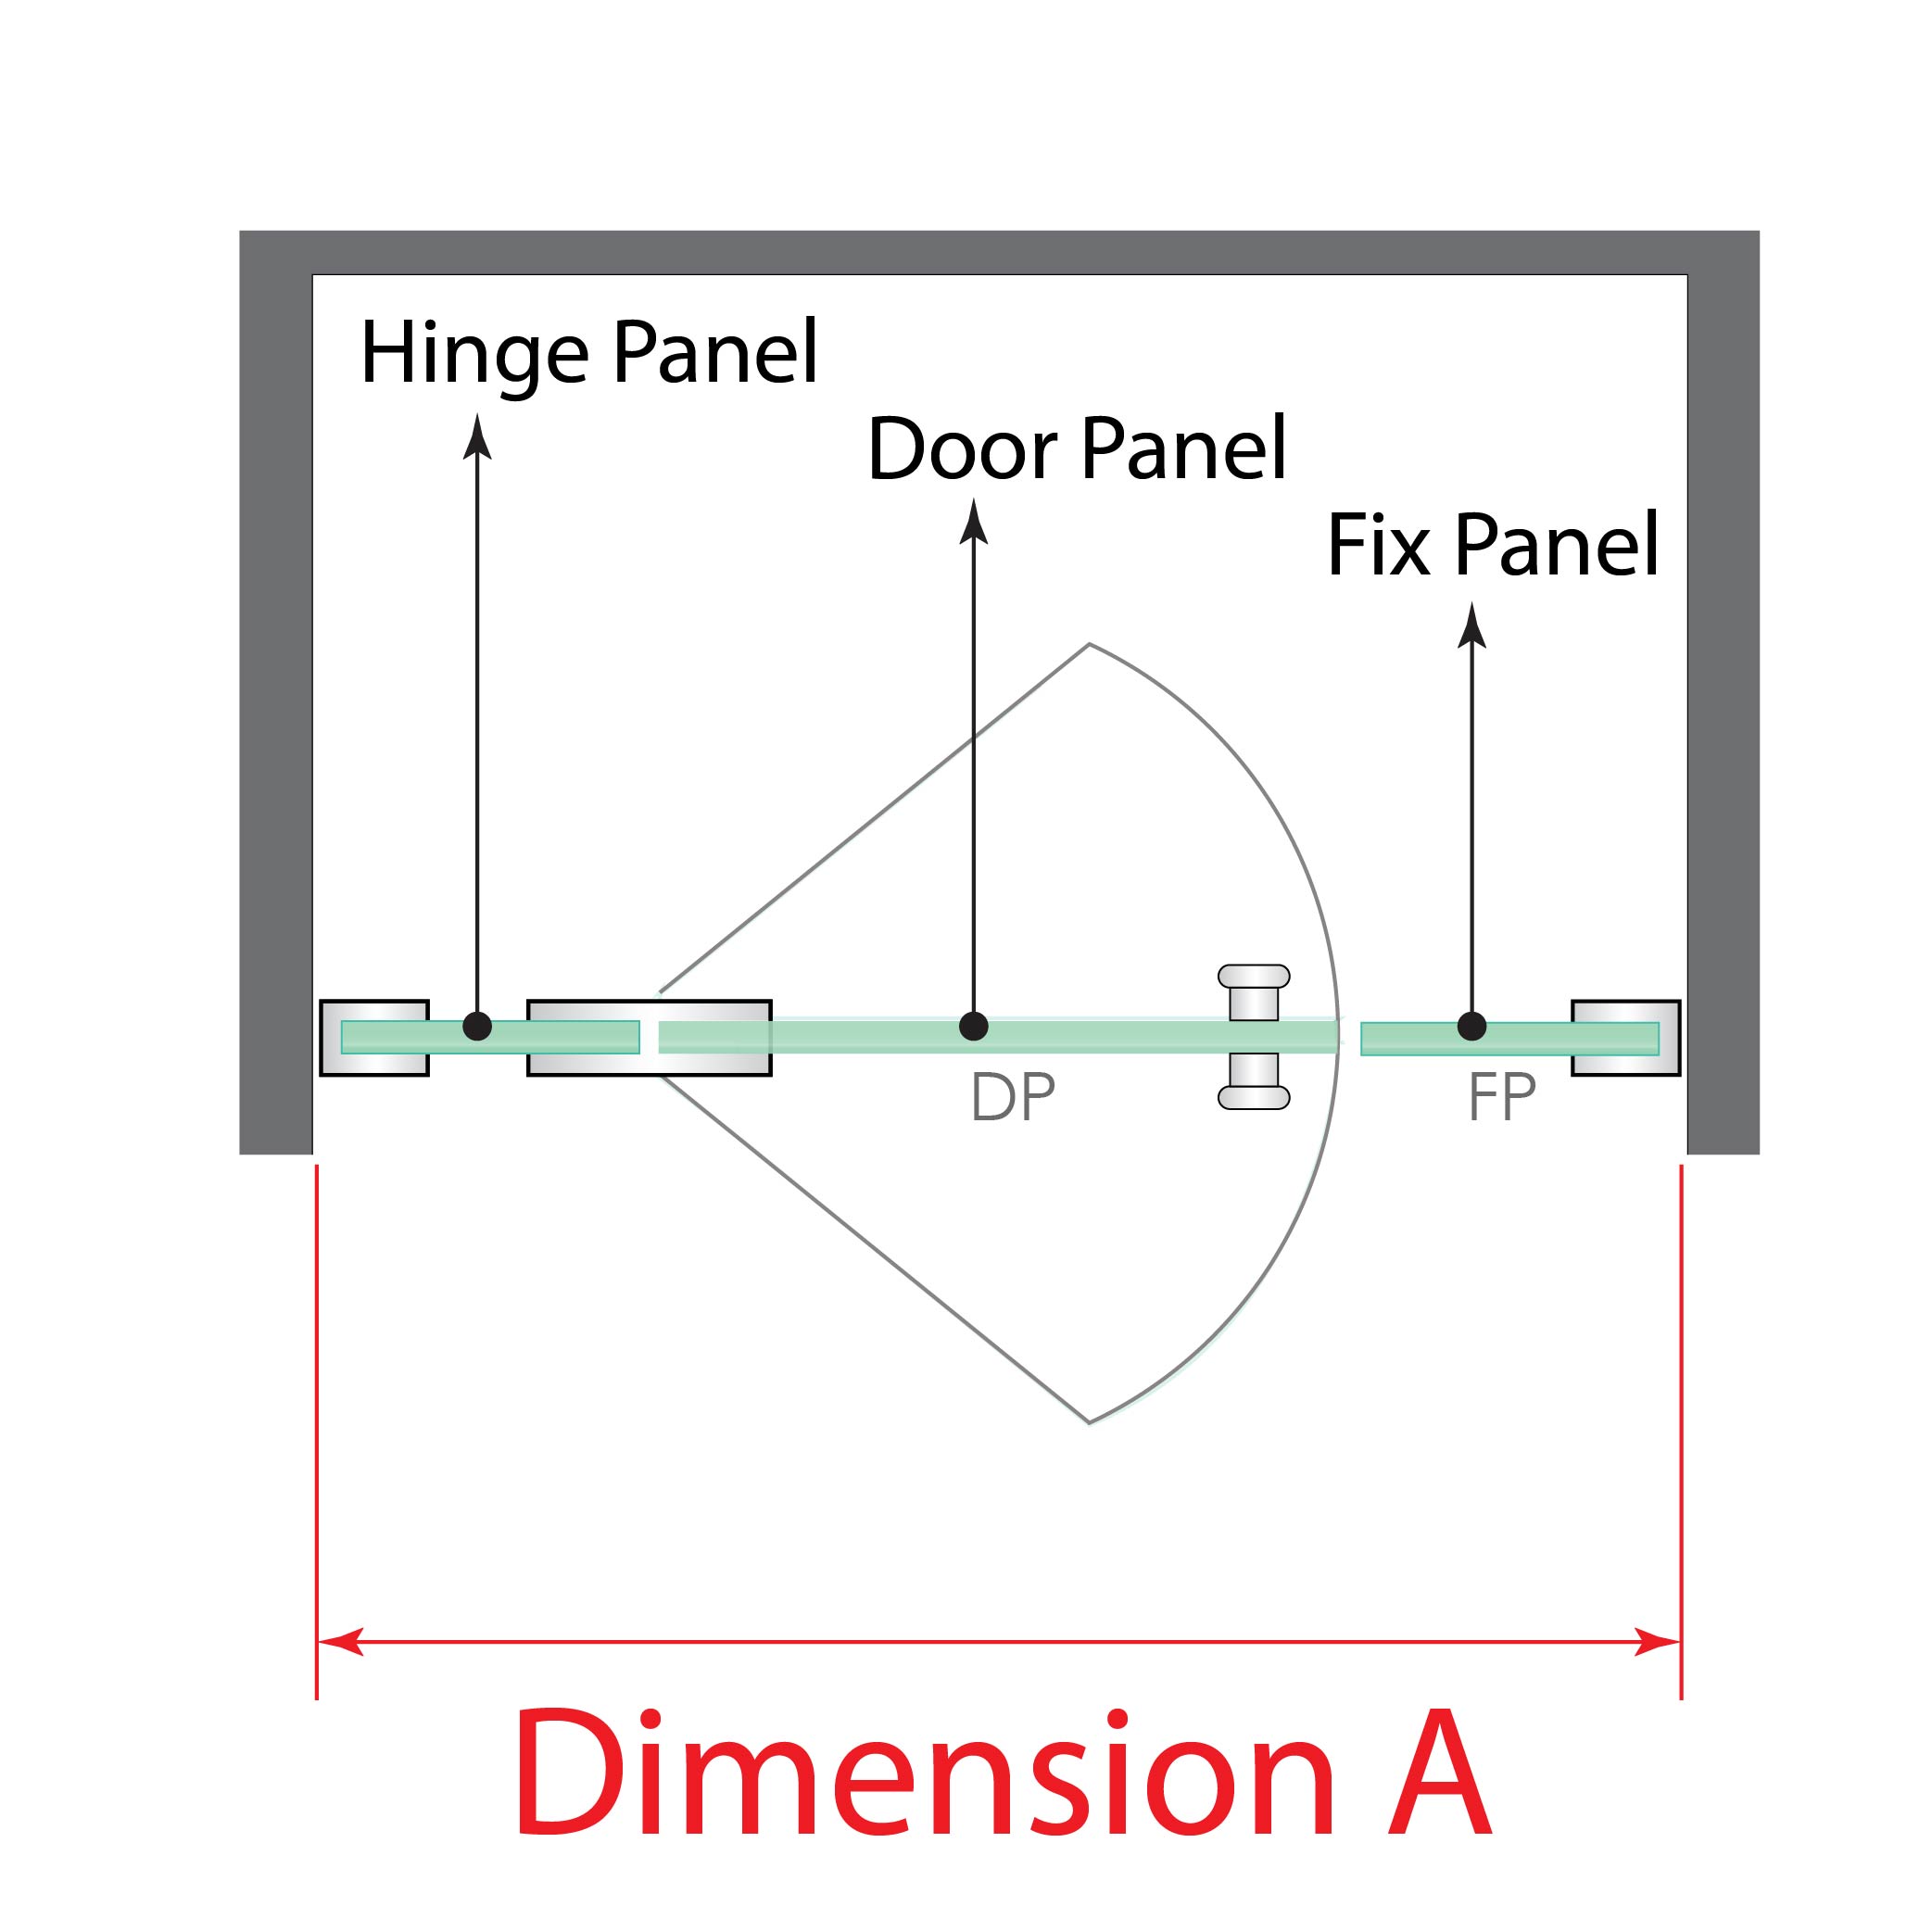 3 PANEL INLINE SCREEN WITH BRUSHED COPPER HARDWARE